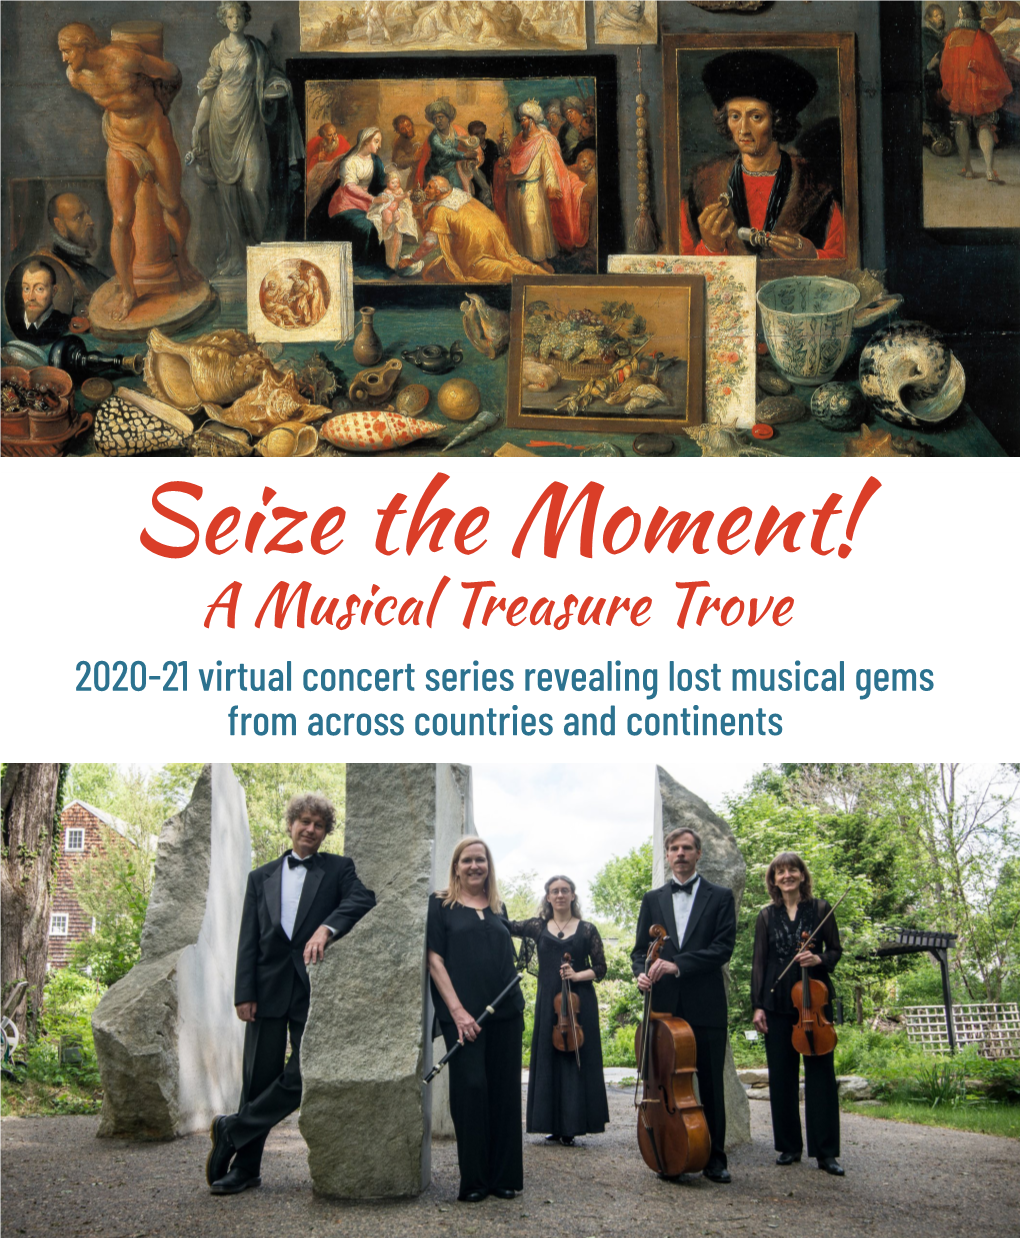 Seize the Moment! a Musical Treasure Trove 2020-21 Virtual Concert Series Revealing Lost Musical Gems from Across Countries and Continents